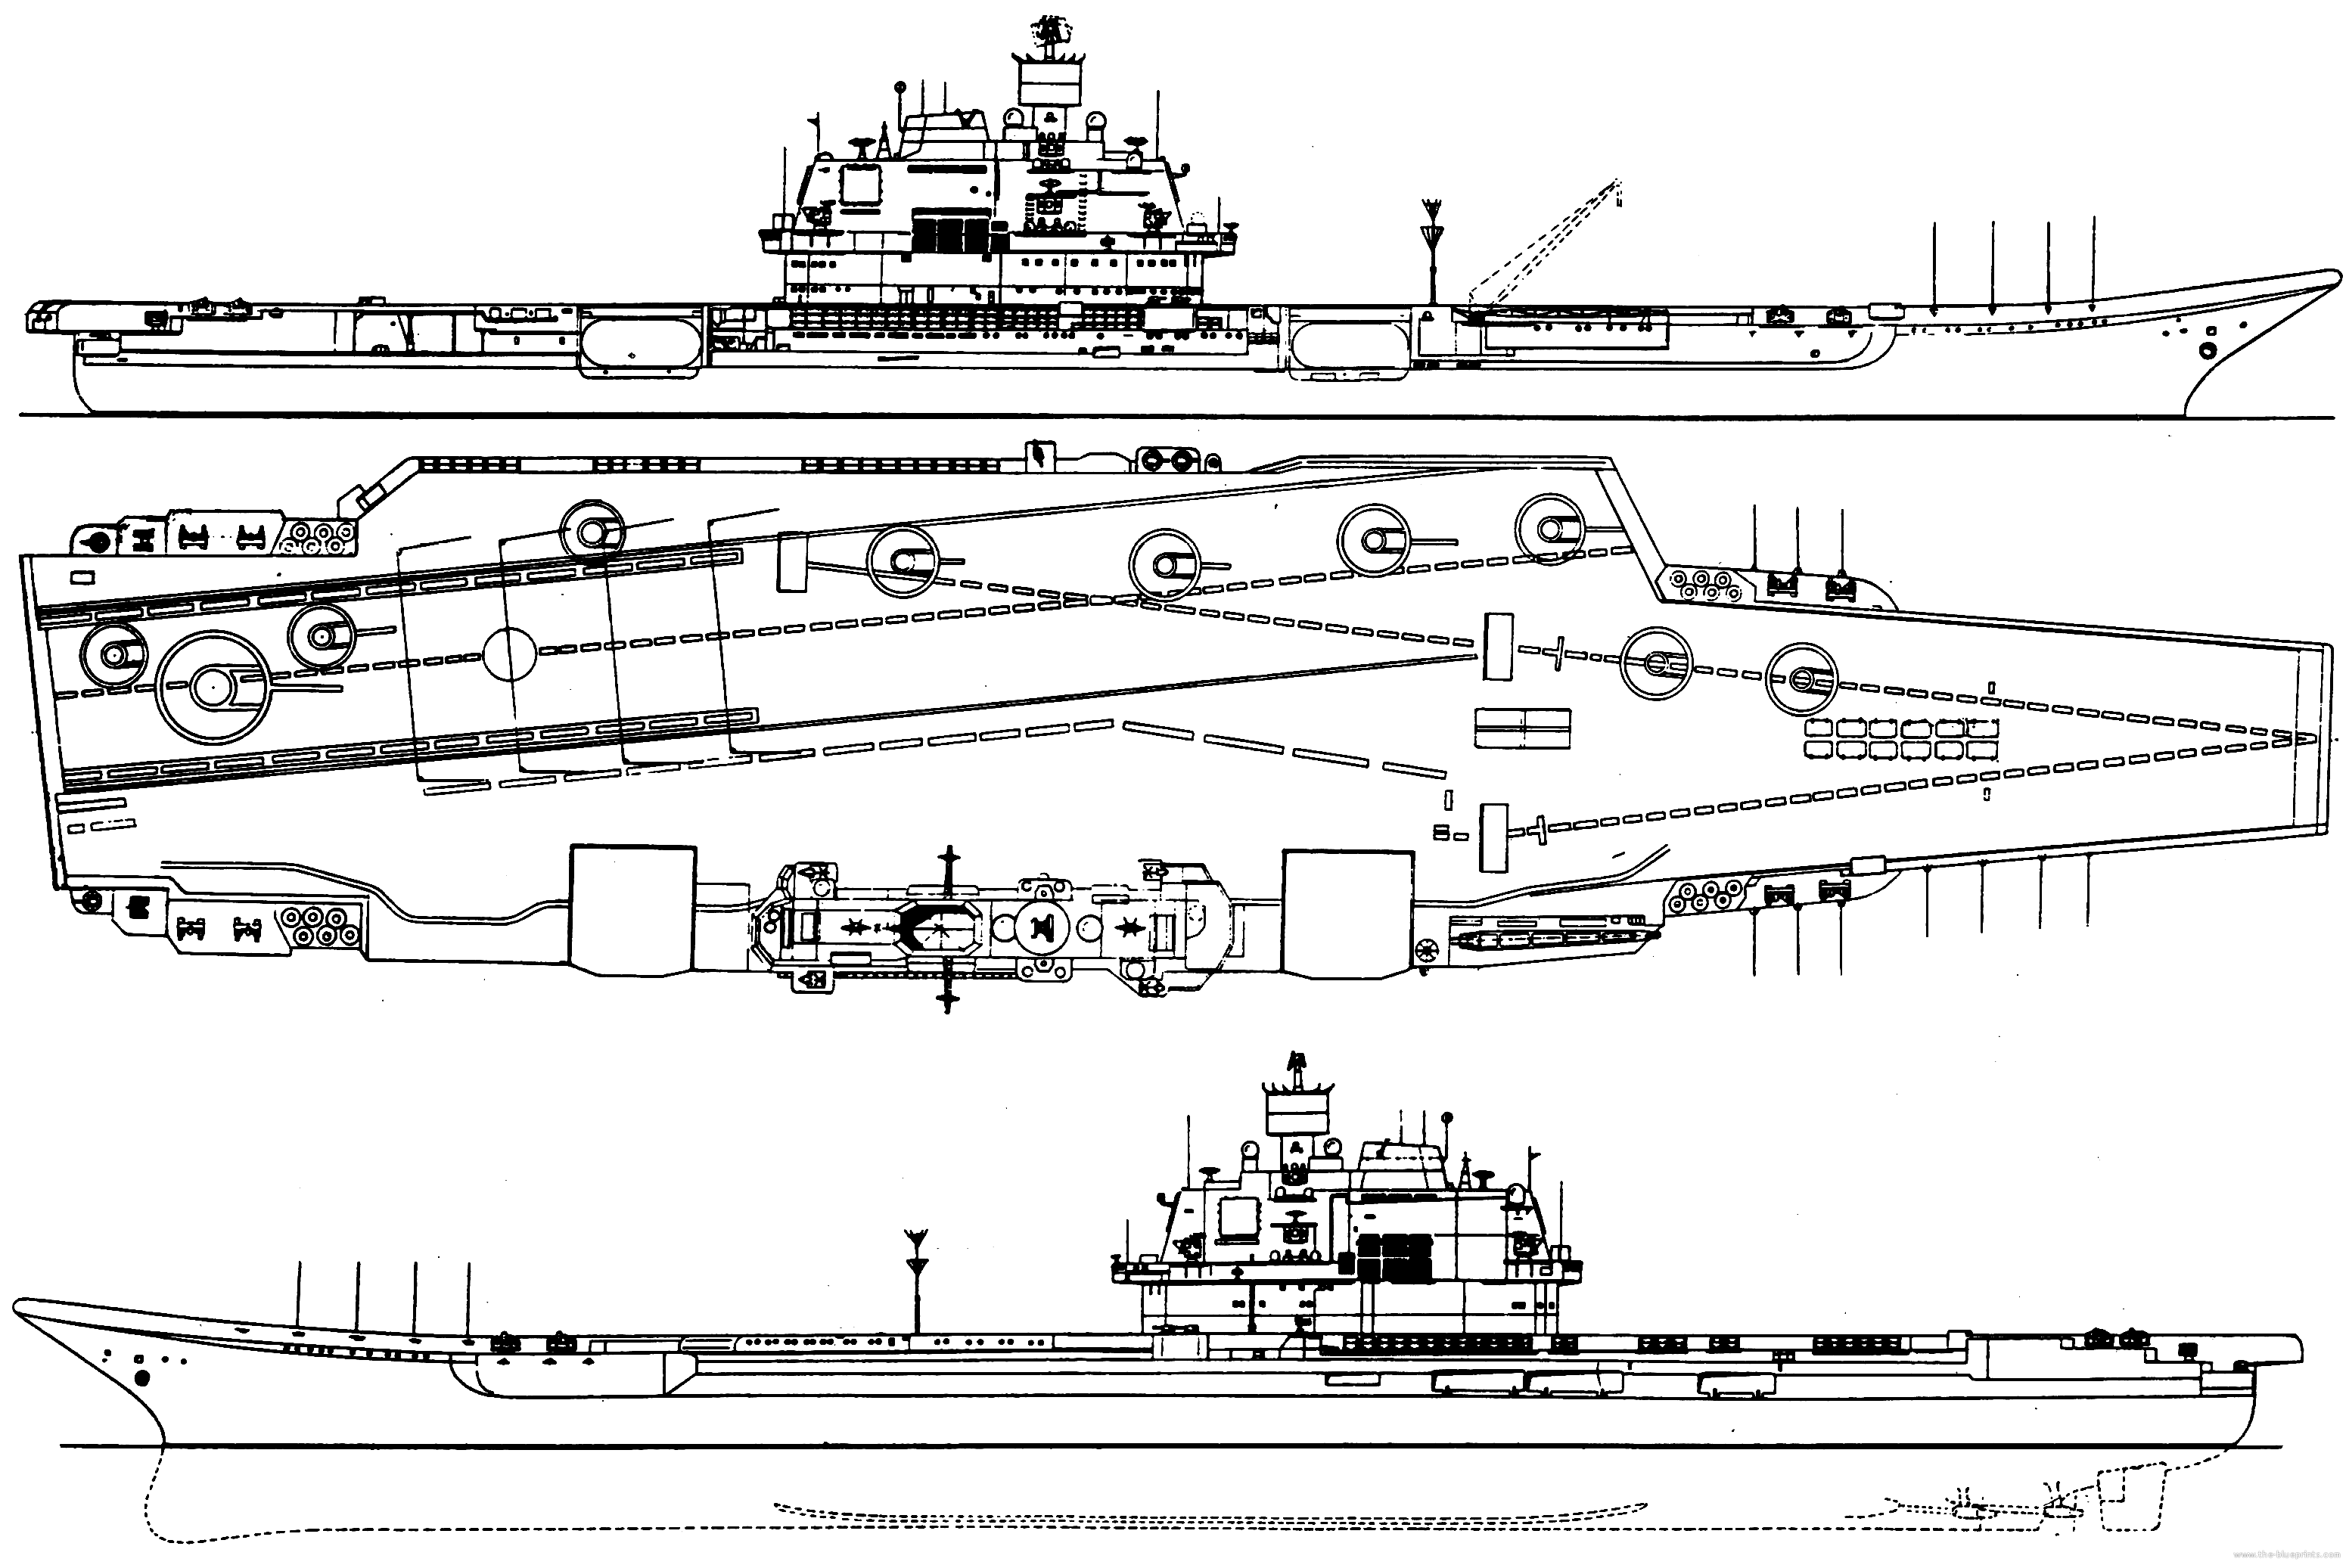 ussr-admiral-kuznetsov-1993-project-11435-orel-aircraft-carrier.png